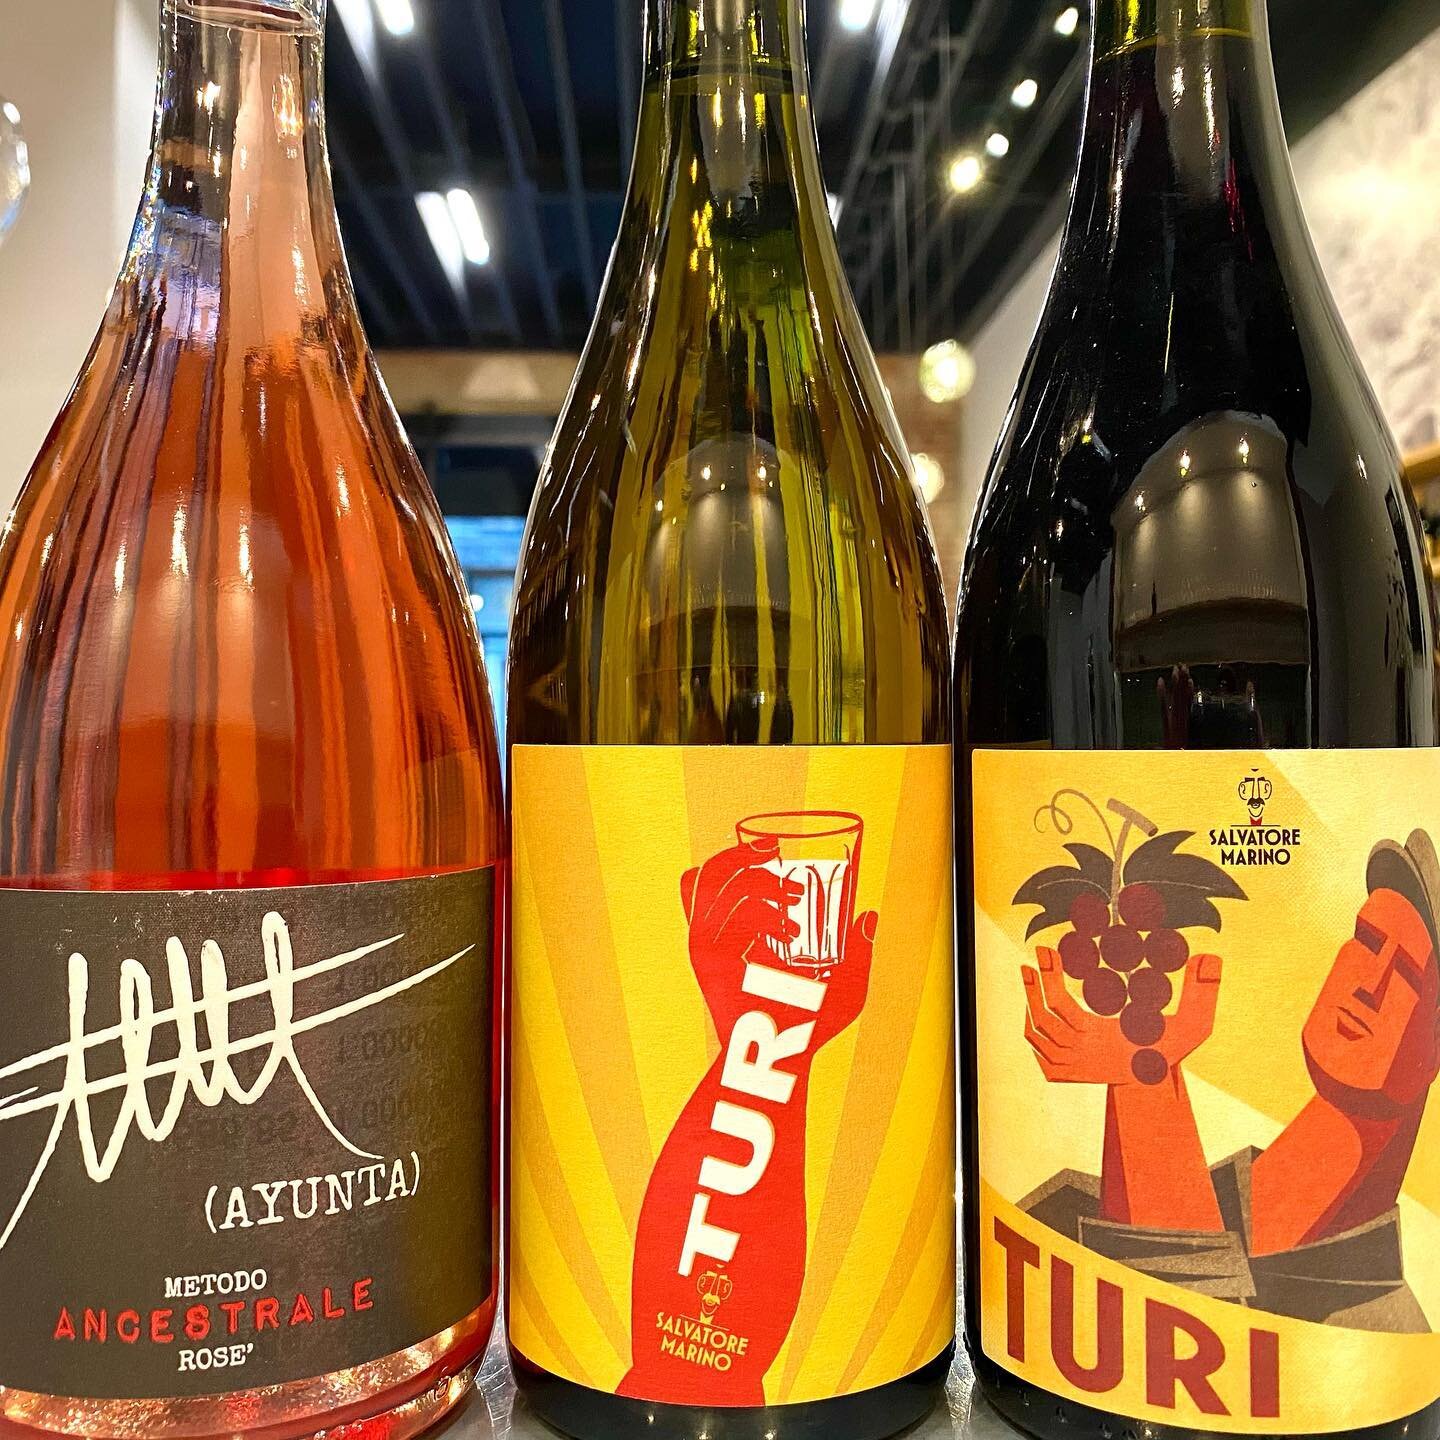 A Trio from Sicily! In case you missed it, Mt. Etna erupted last week. Local wine makers took it in stride, knowing the mineral-rich ash drifting down on their soils is what makes their wines unique. Filippo Mangione is one of them; he grew up on the